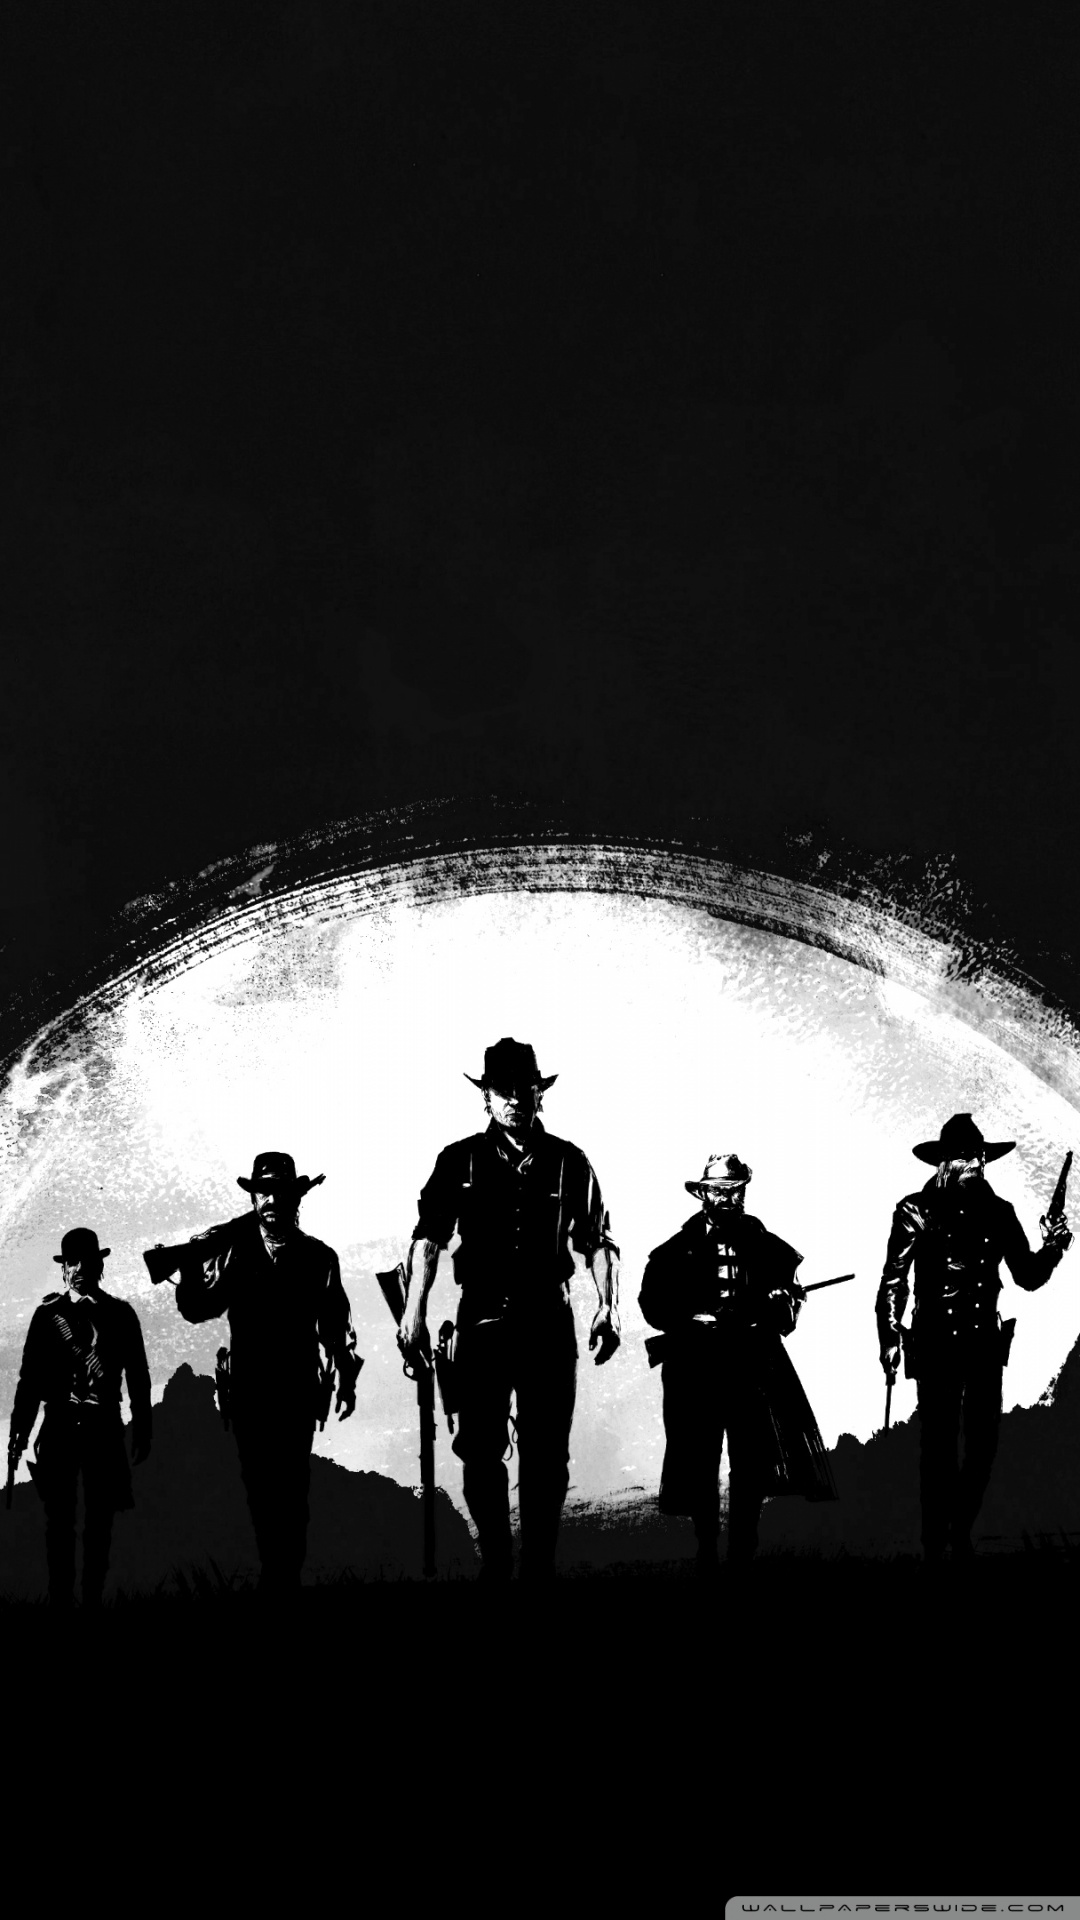 Wallpaper ID 392460  Video Game Red Dead Redemption 2 Phone Wallpaper  Arthur Morgan 1080x1920 free download